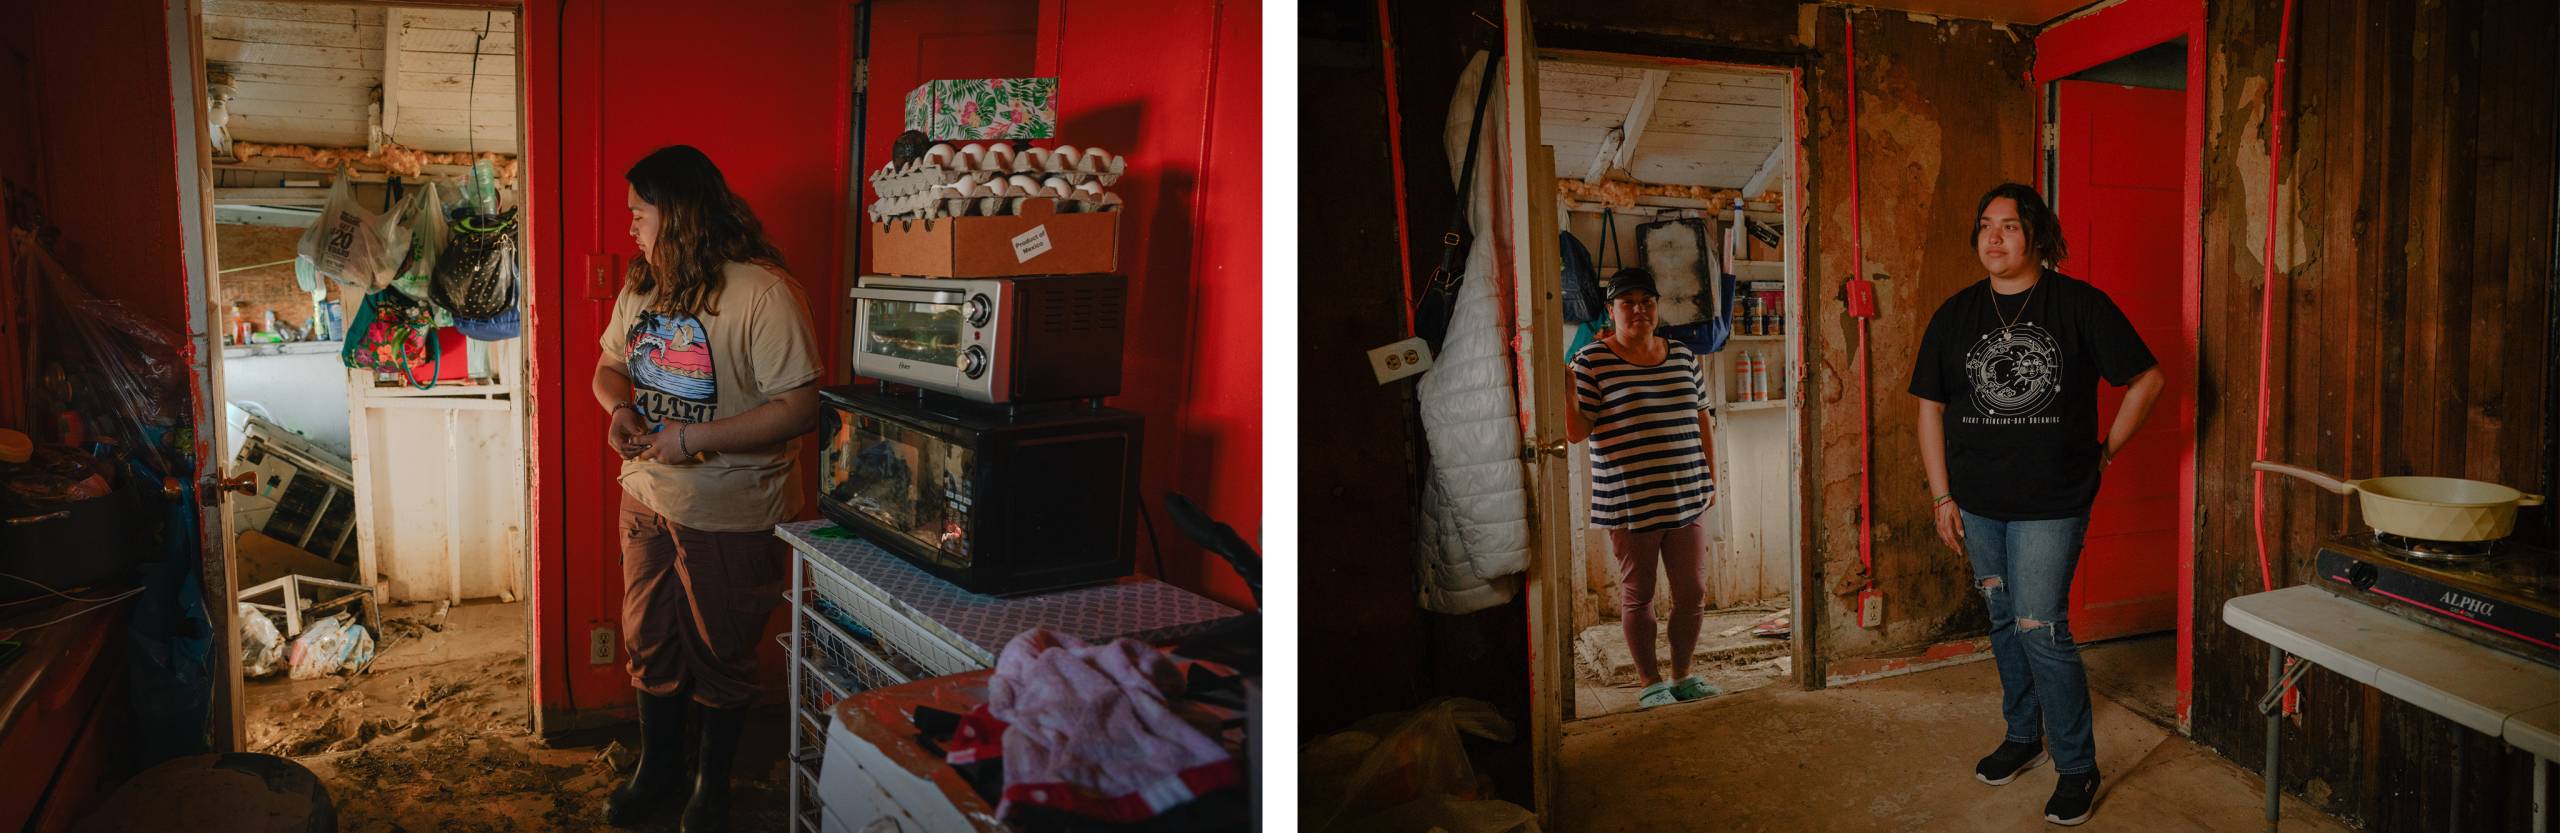 Two photos next to each other of people standing in doors. On the left a person looks at flood damage. On the right they stand in a bare room as their mother looks on.